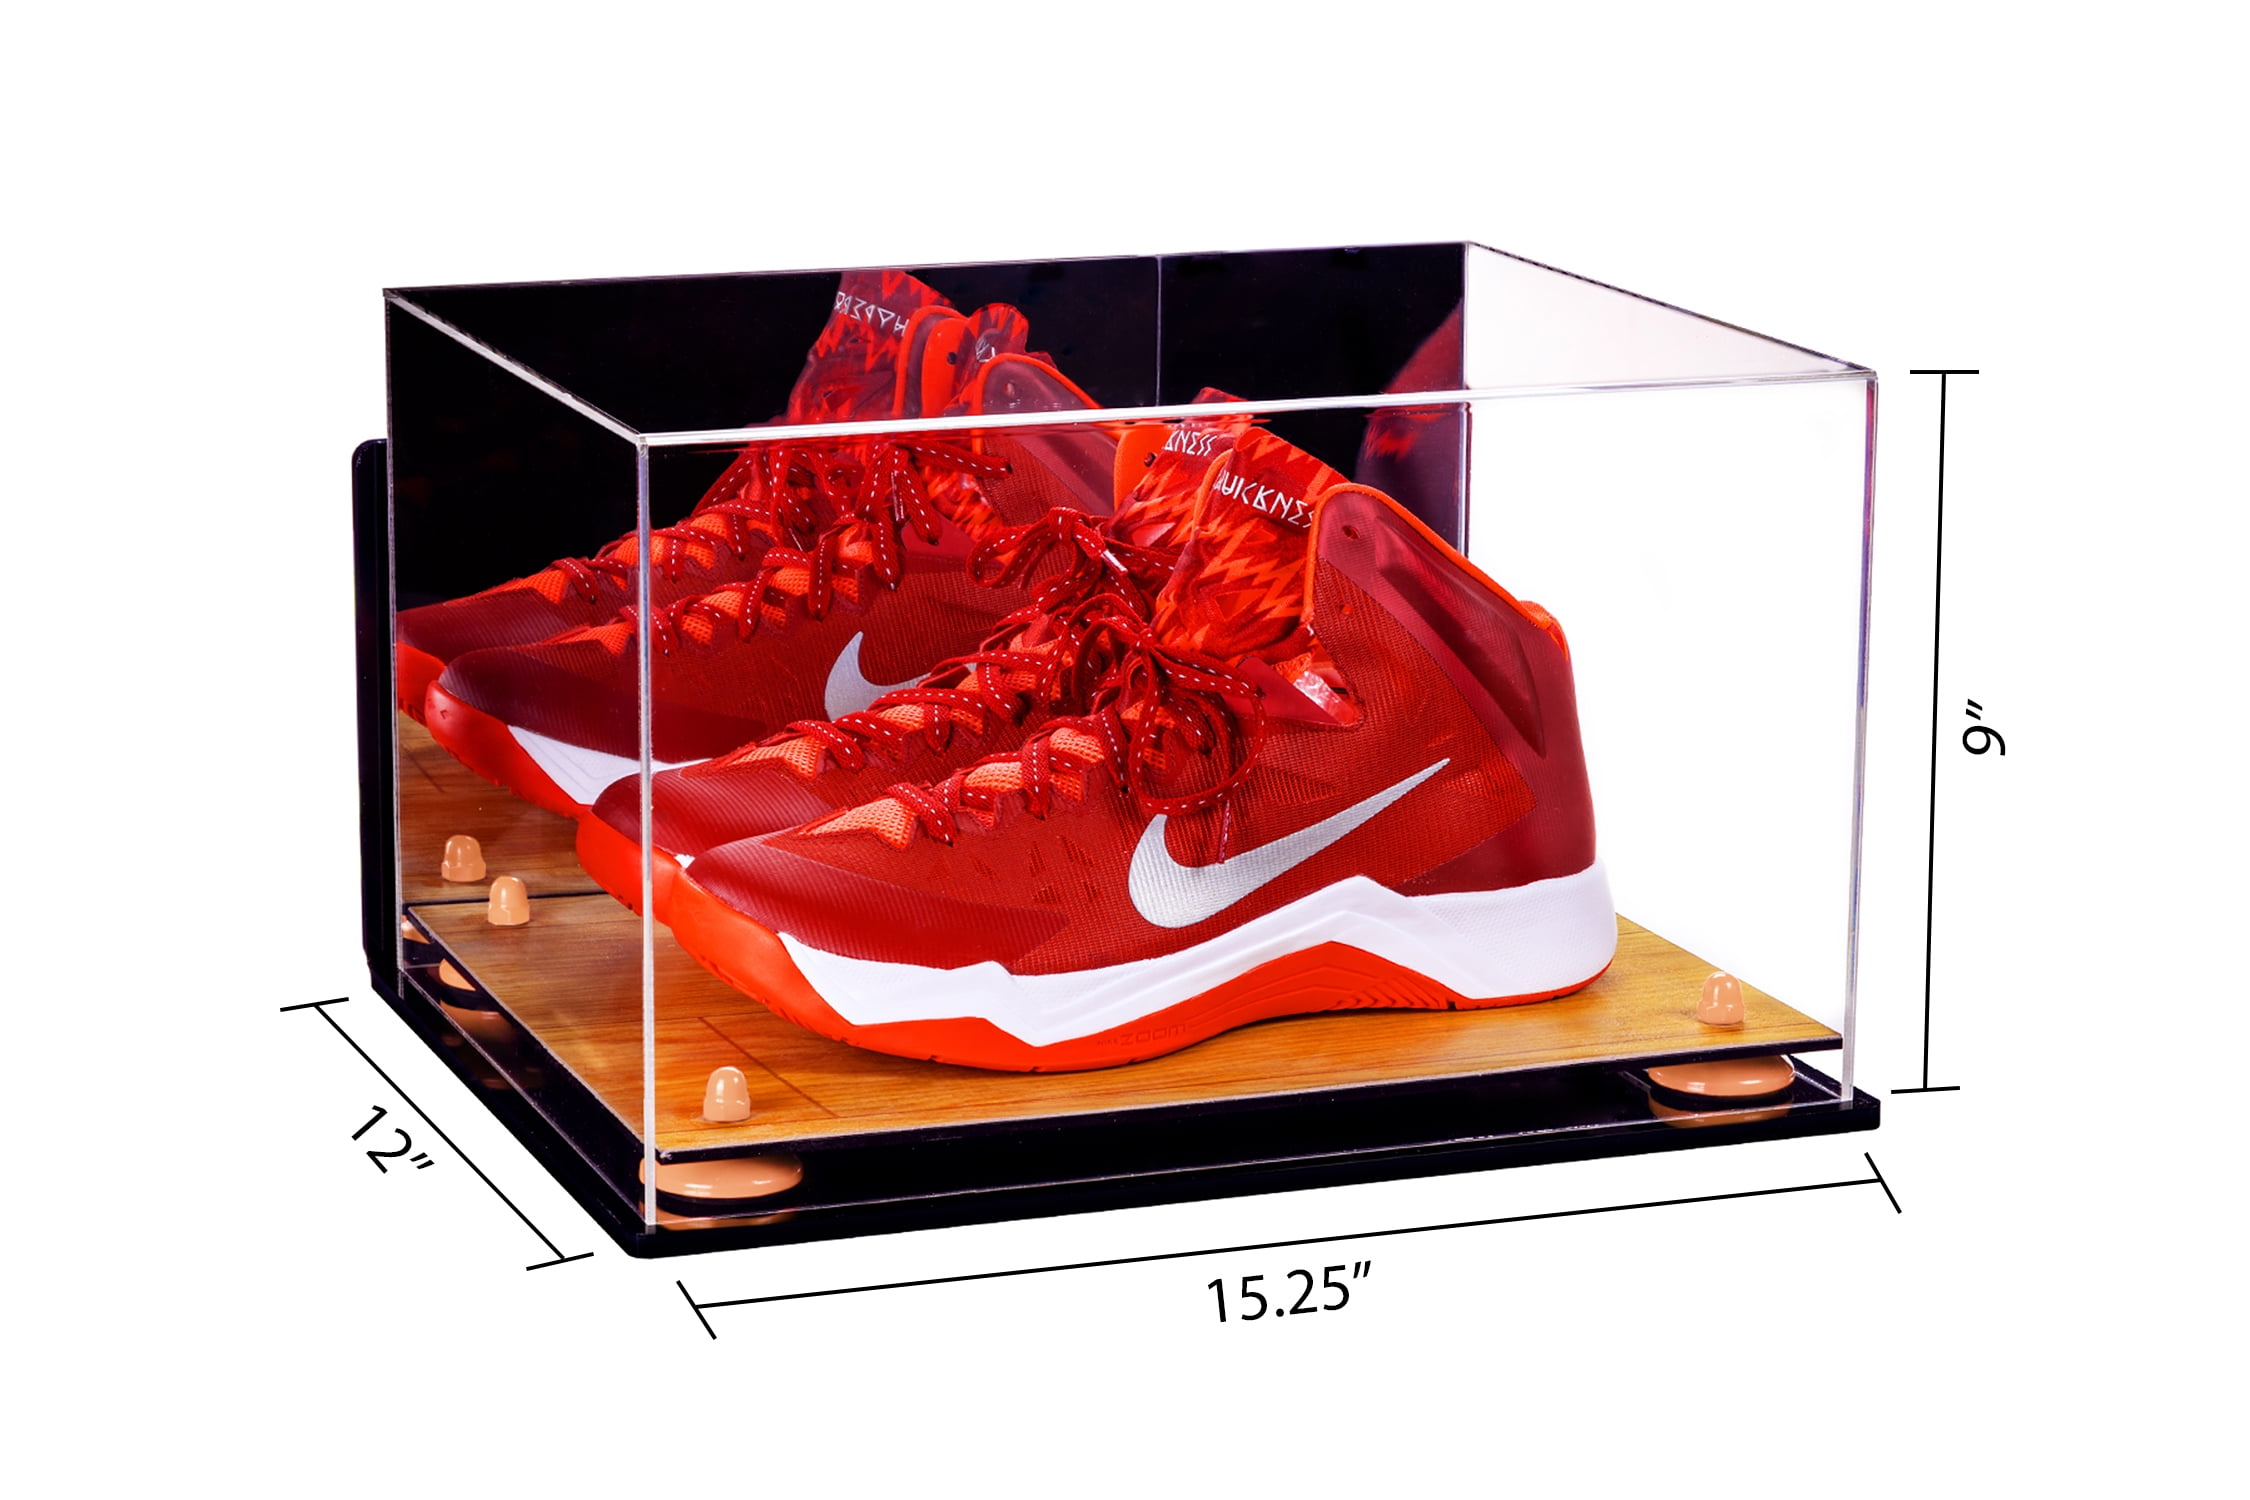 Acrylic Wall Mount Shoe Pair Display Case Shoes Size 12 and Under UV Protecting 